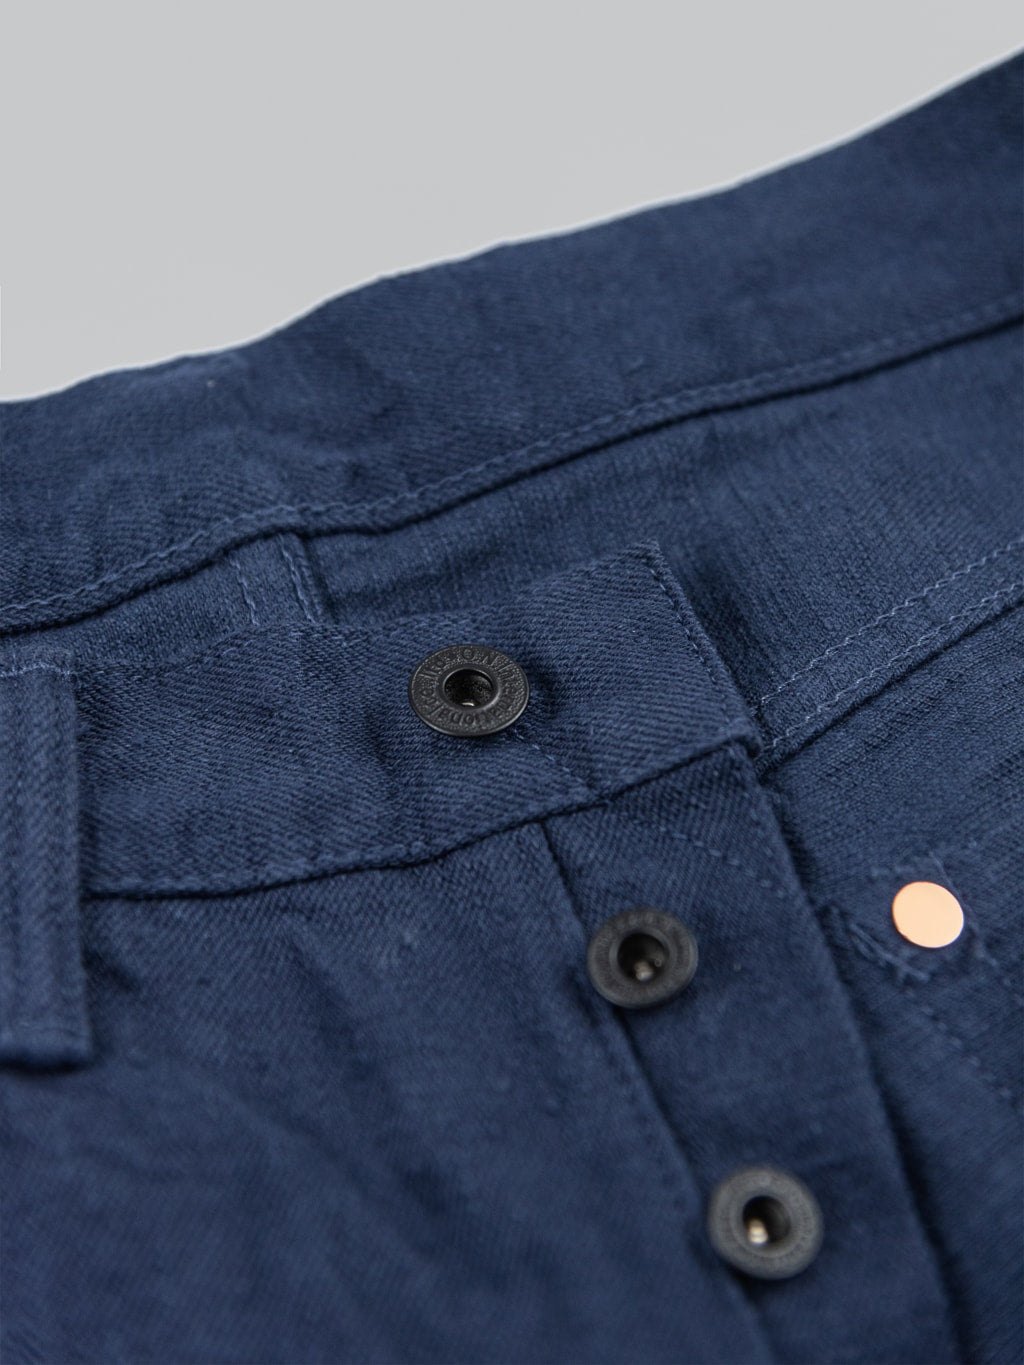 ONI Denim 612 Super Low Tension Navy Relaxed Tapered Jeans copper buttons